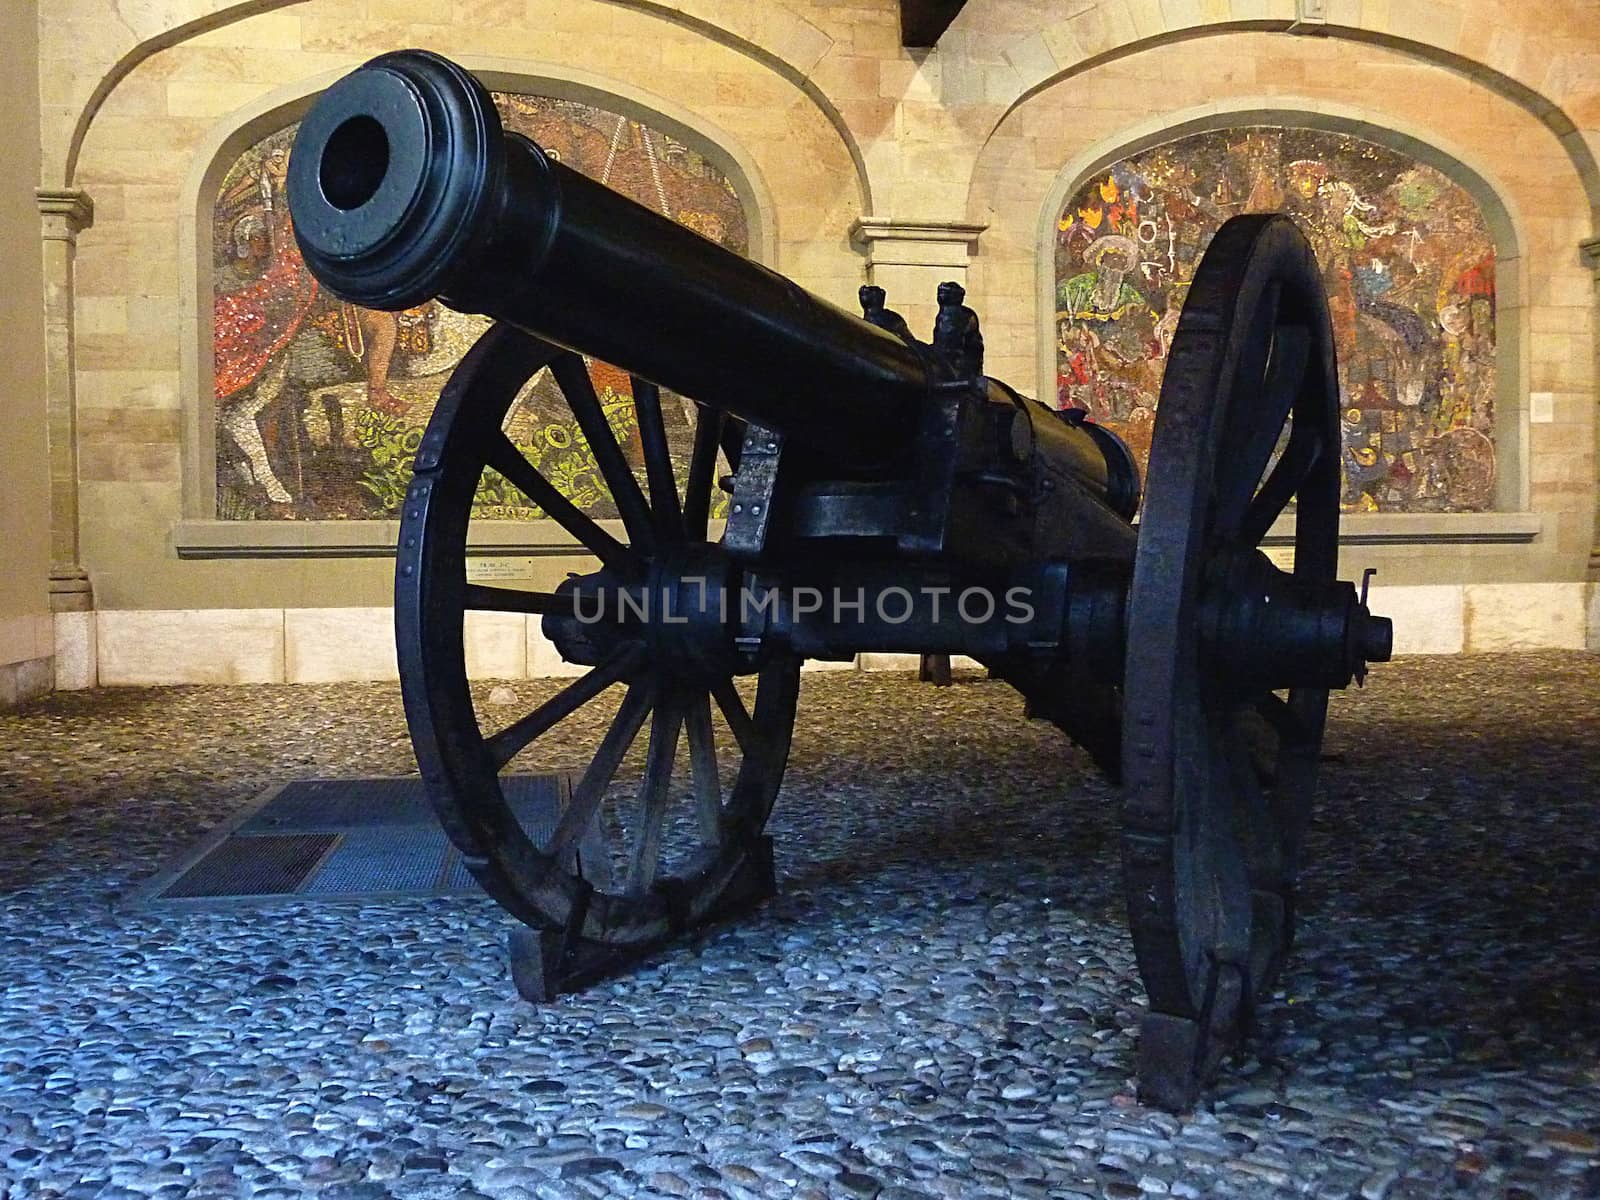 Black cannon supported by two wheels with paintings behind